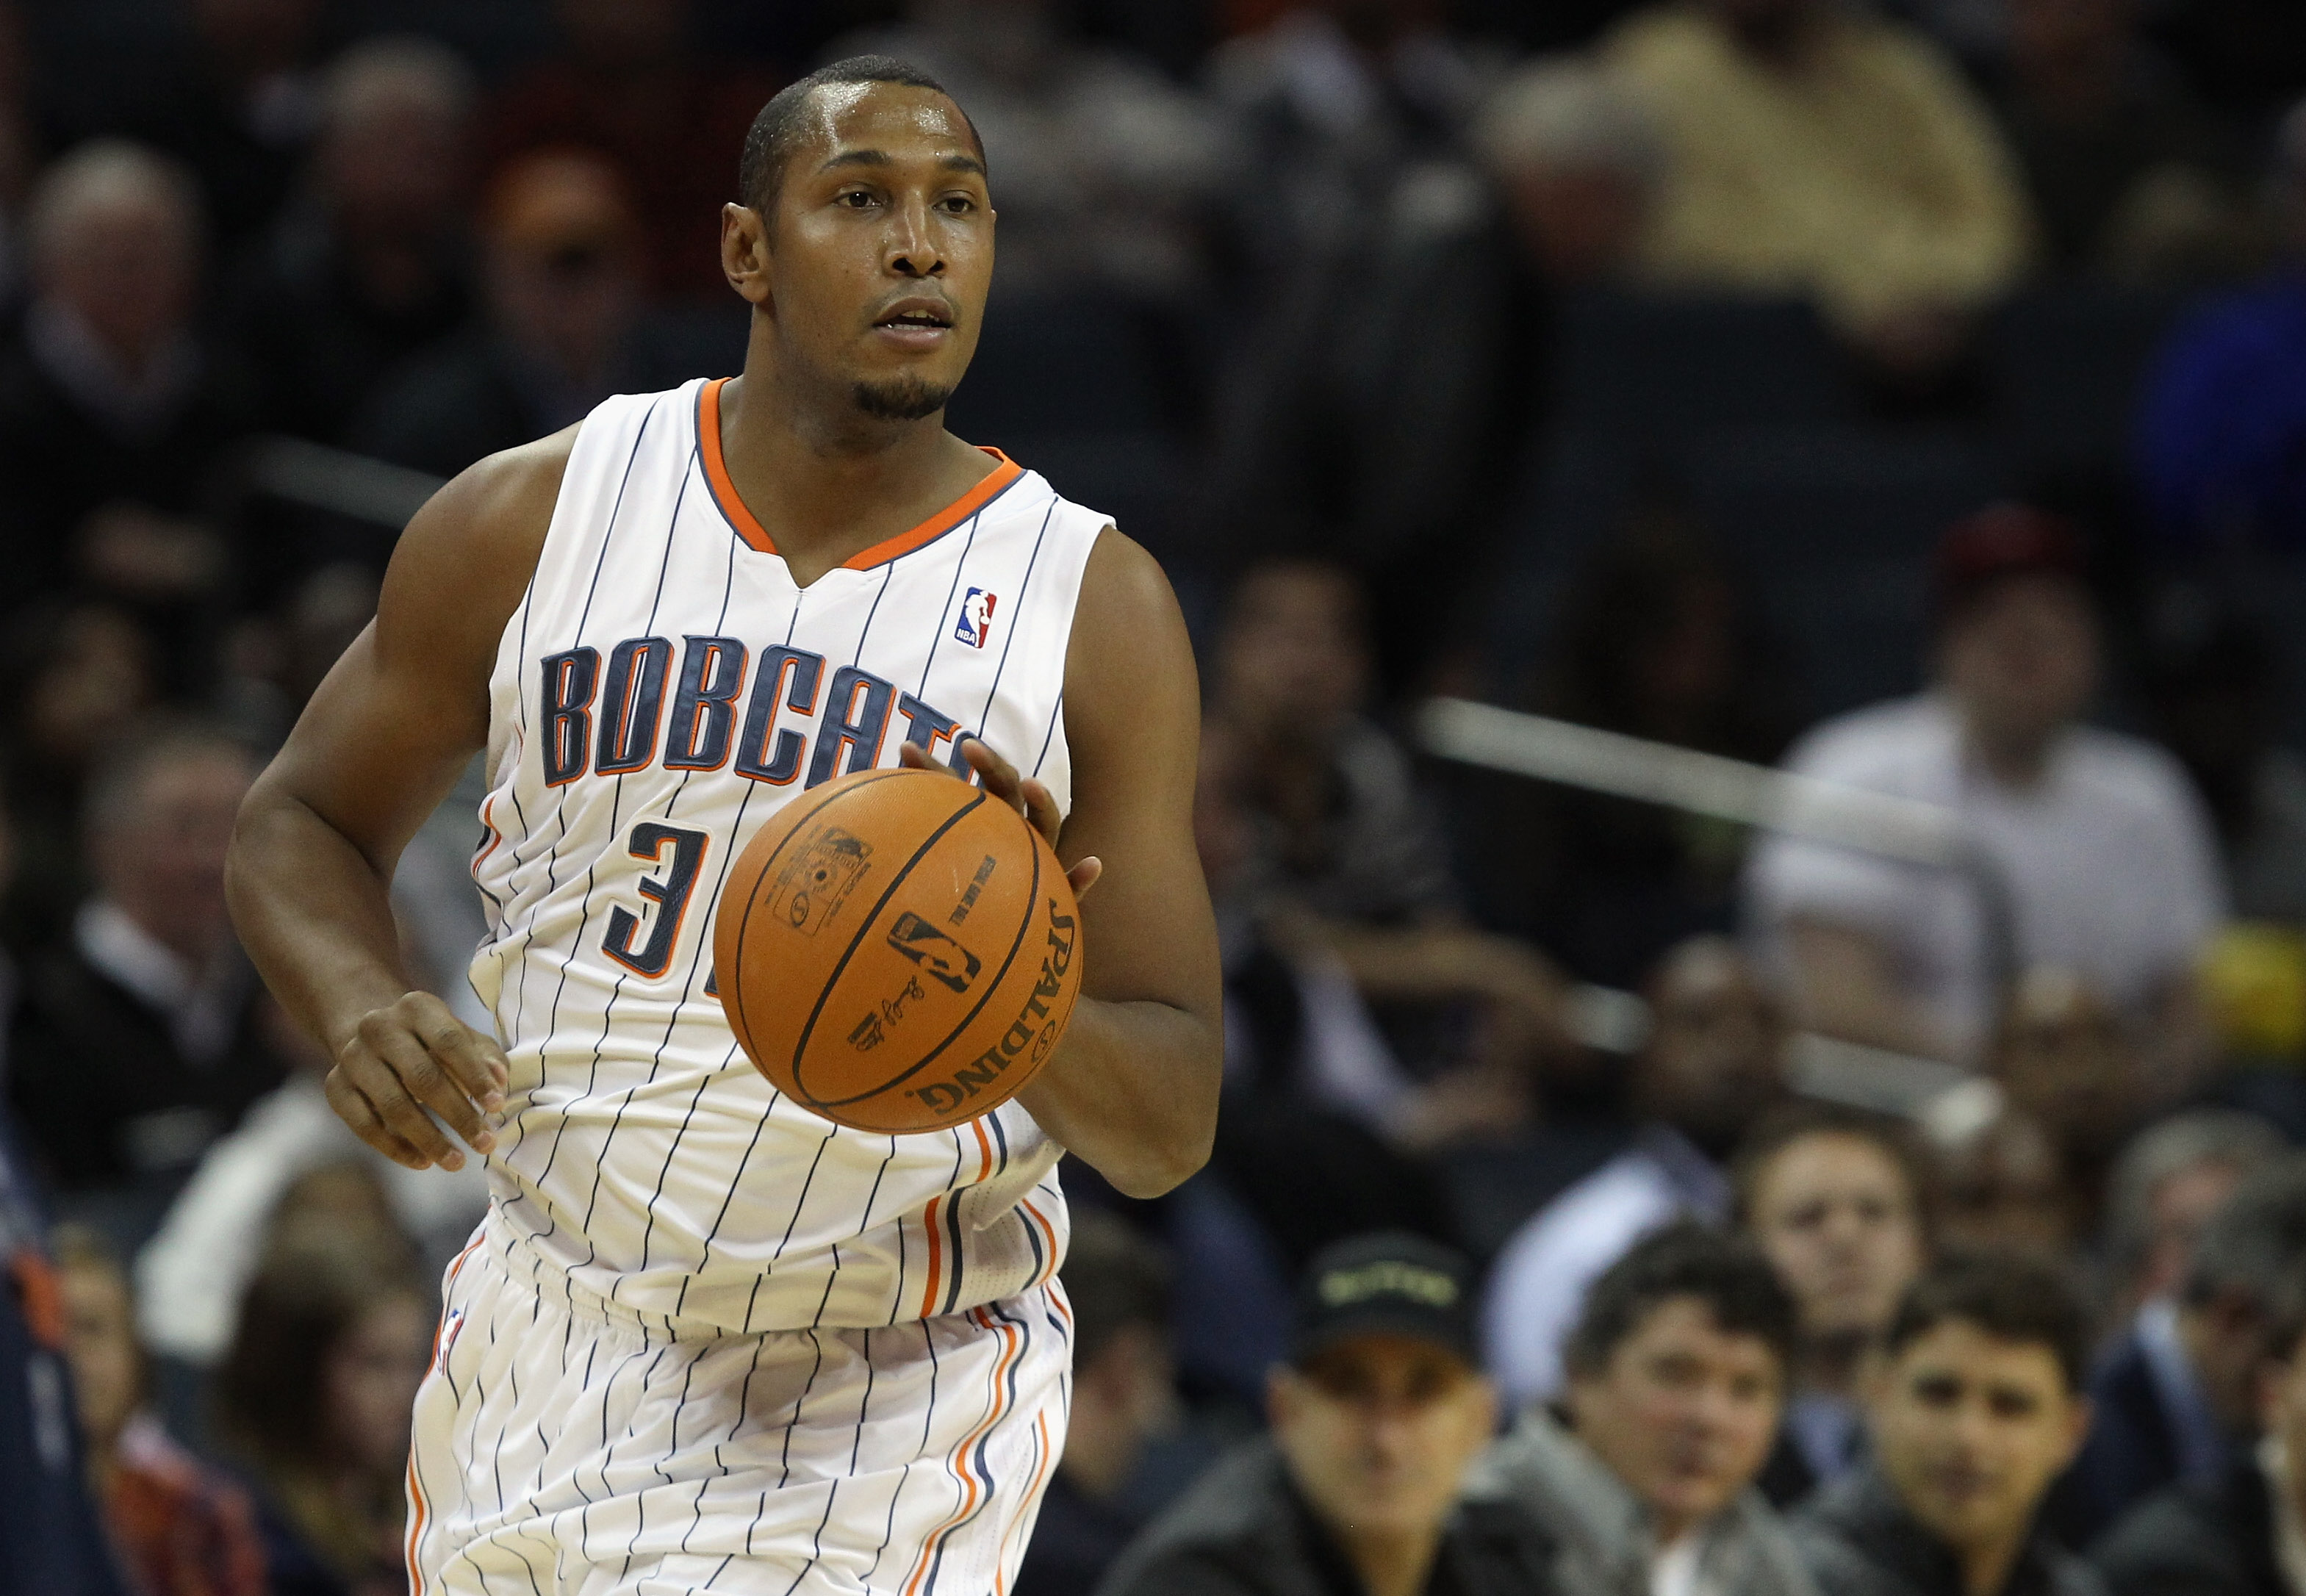 CHARLOTTE, NC - NOVEMBER 08:  Boris Diaw #32 of the Charlotte Bobcats against the San Antonio Spurs during their game at Time Warner Cable Arena on November 8, 2010 in Charlotte, North Carolina.  NOTE TO USER: User expressly acknowledges and agrees that,